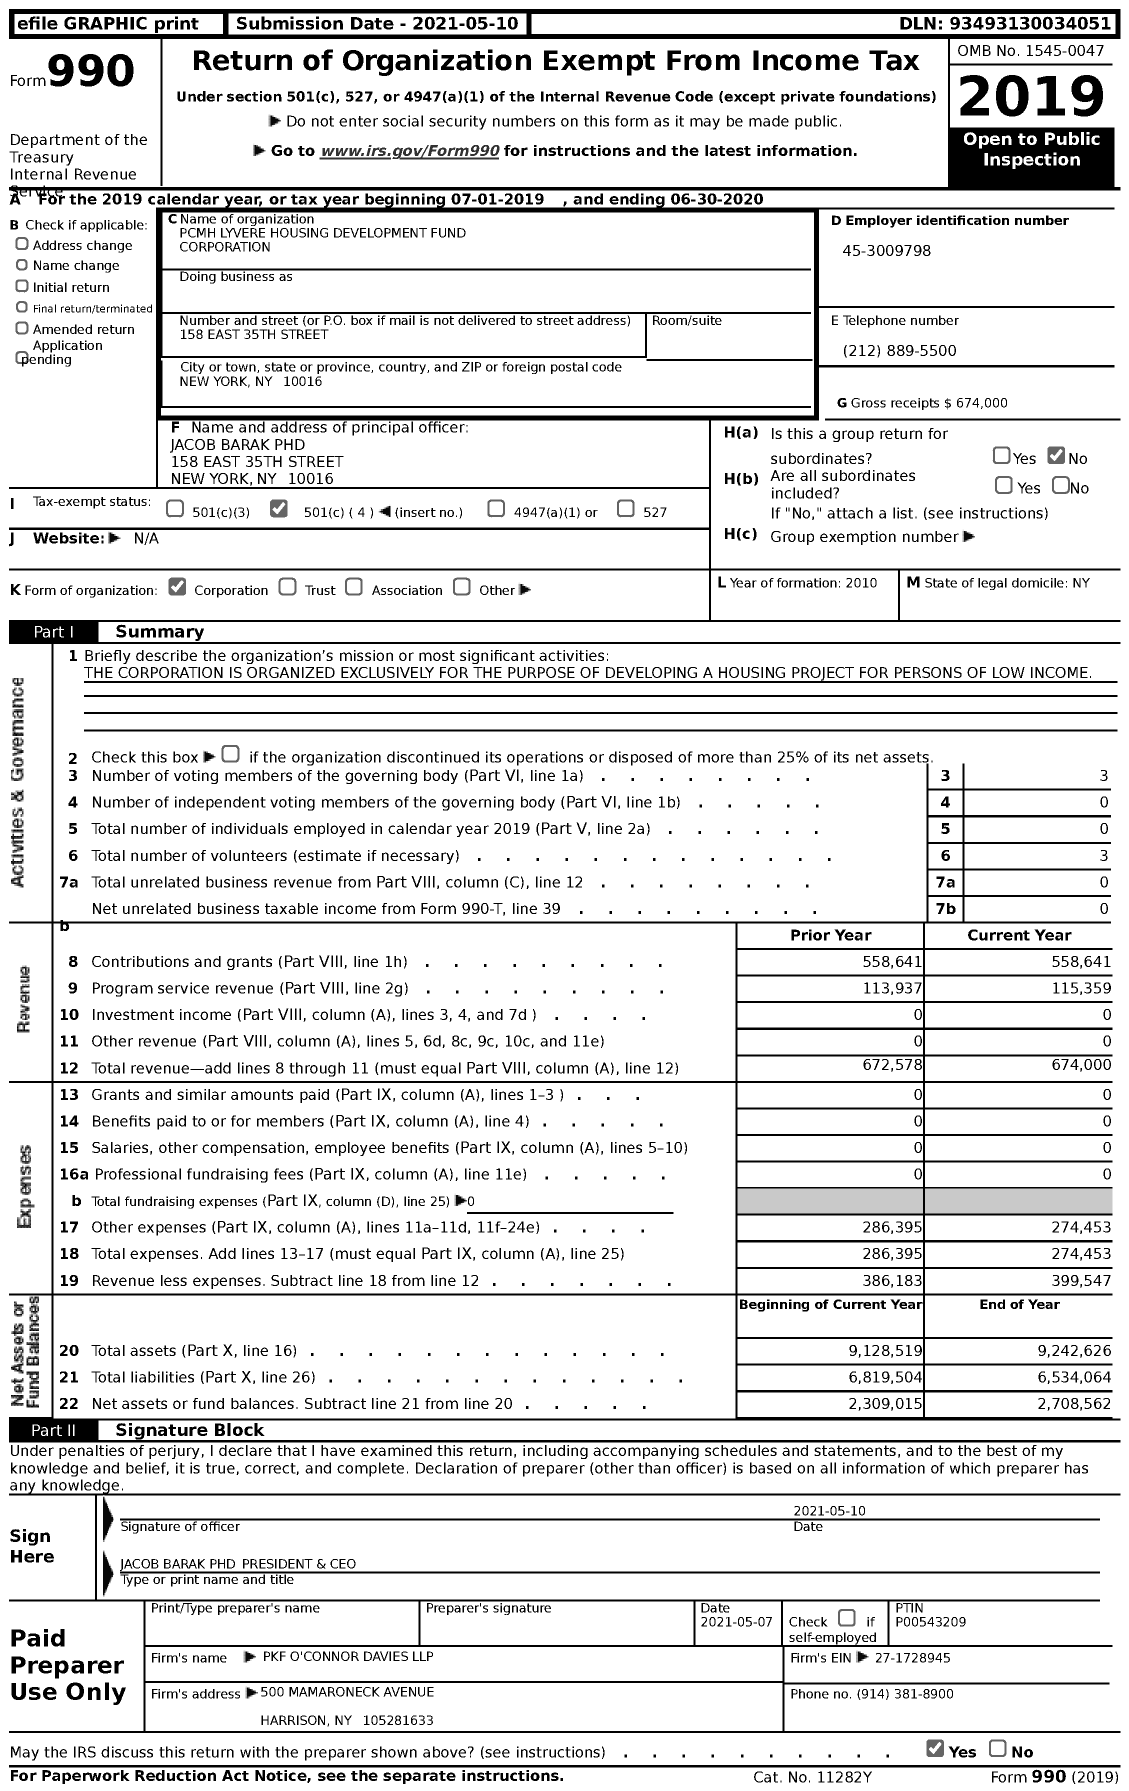 Image of first page of 2019 Form 990 for PCMH Lyvere Housing Development Fund Corporation